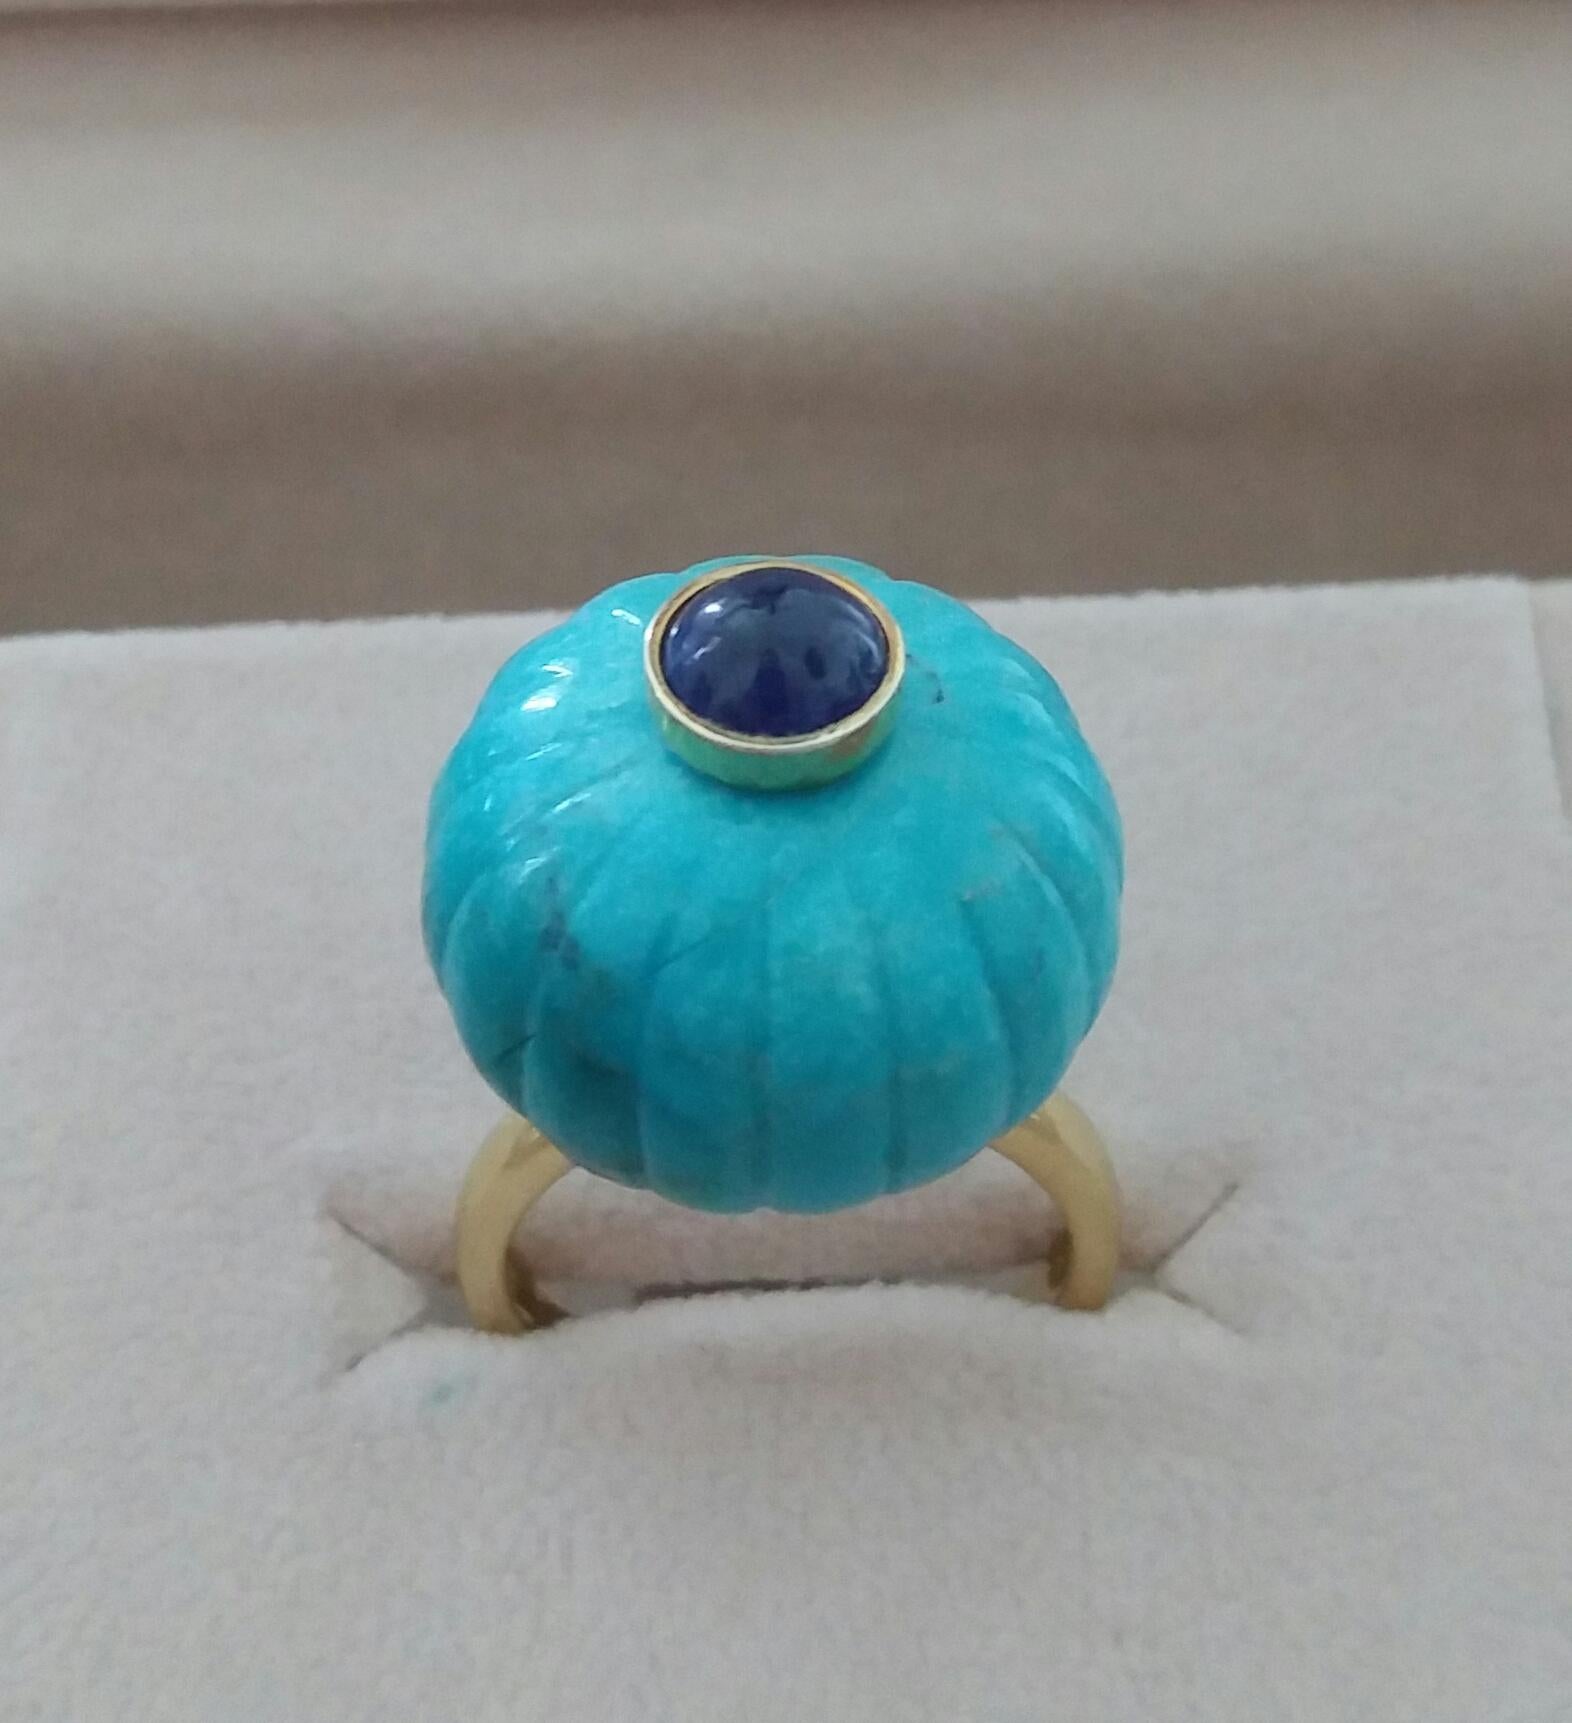 Melon cut Turquoise Round Bead  of 20 mm. in diameter and 14 mm. thick with in the center a round Blue Sapphire cabochon of 7 mm. in diameter  is mounted on top of a 14 Kt. yellow gold shank.
In 1978 our workshop started in Italy to make simple-chic